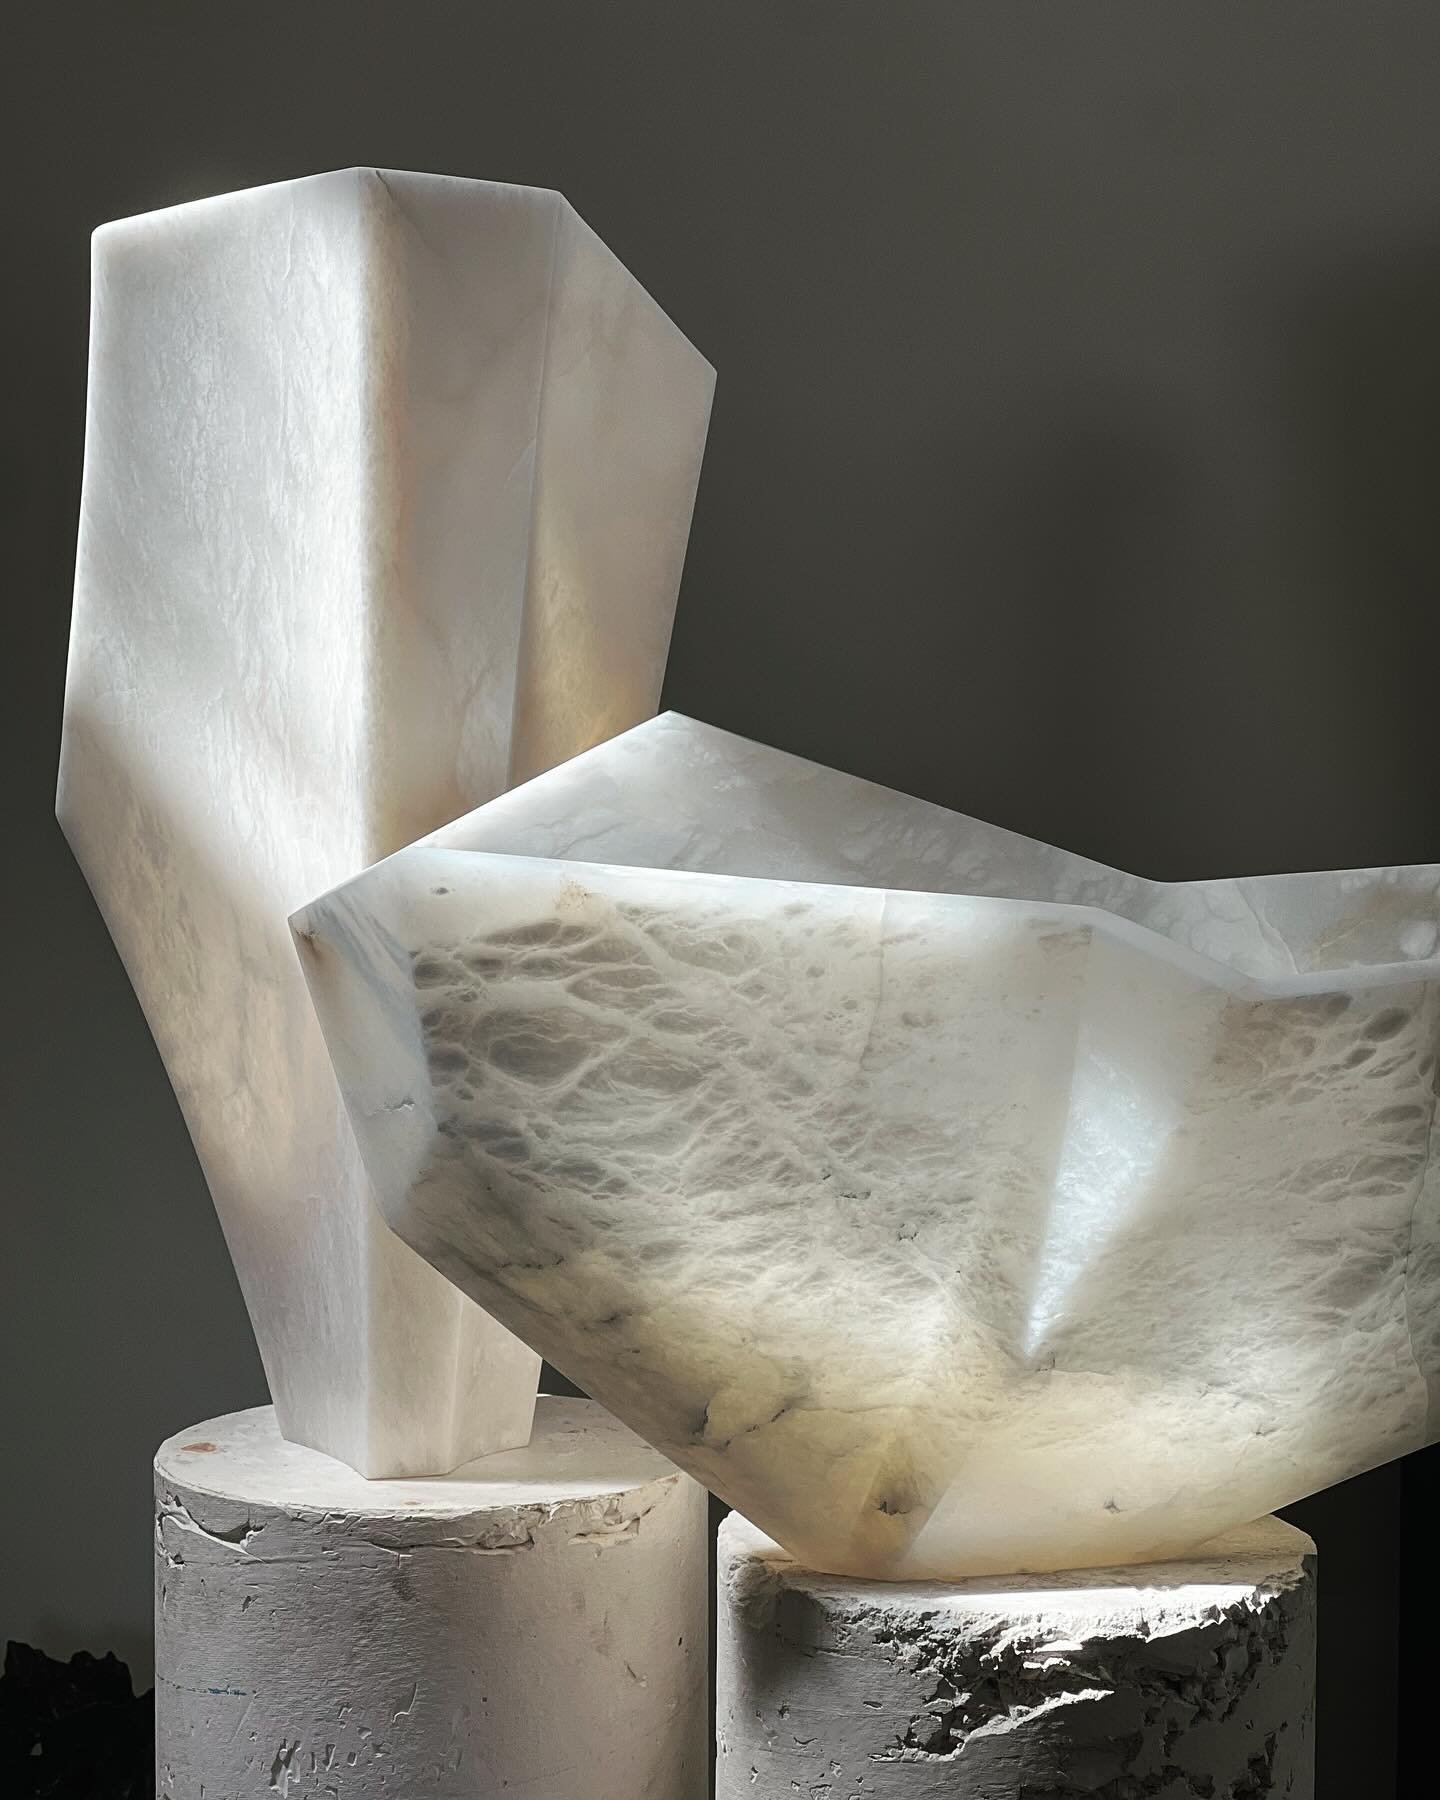 The sunlight in the studio is really working all the angles on this pair of Vault Vessels. Nothing beats natural light for bringing out the depth of the stone and alabaster seems to hold the sunlight like no other material. New work for @kalpaartlivi